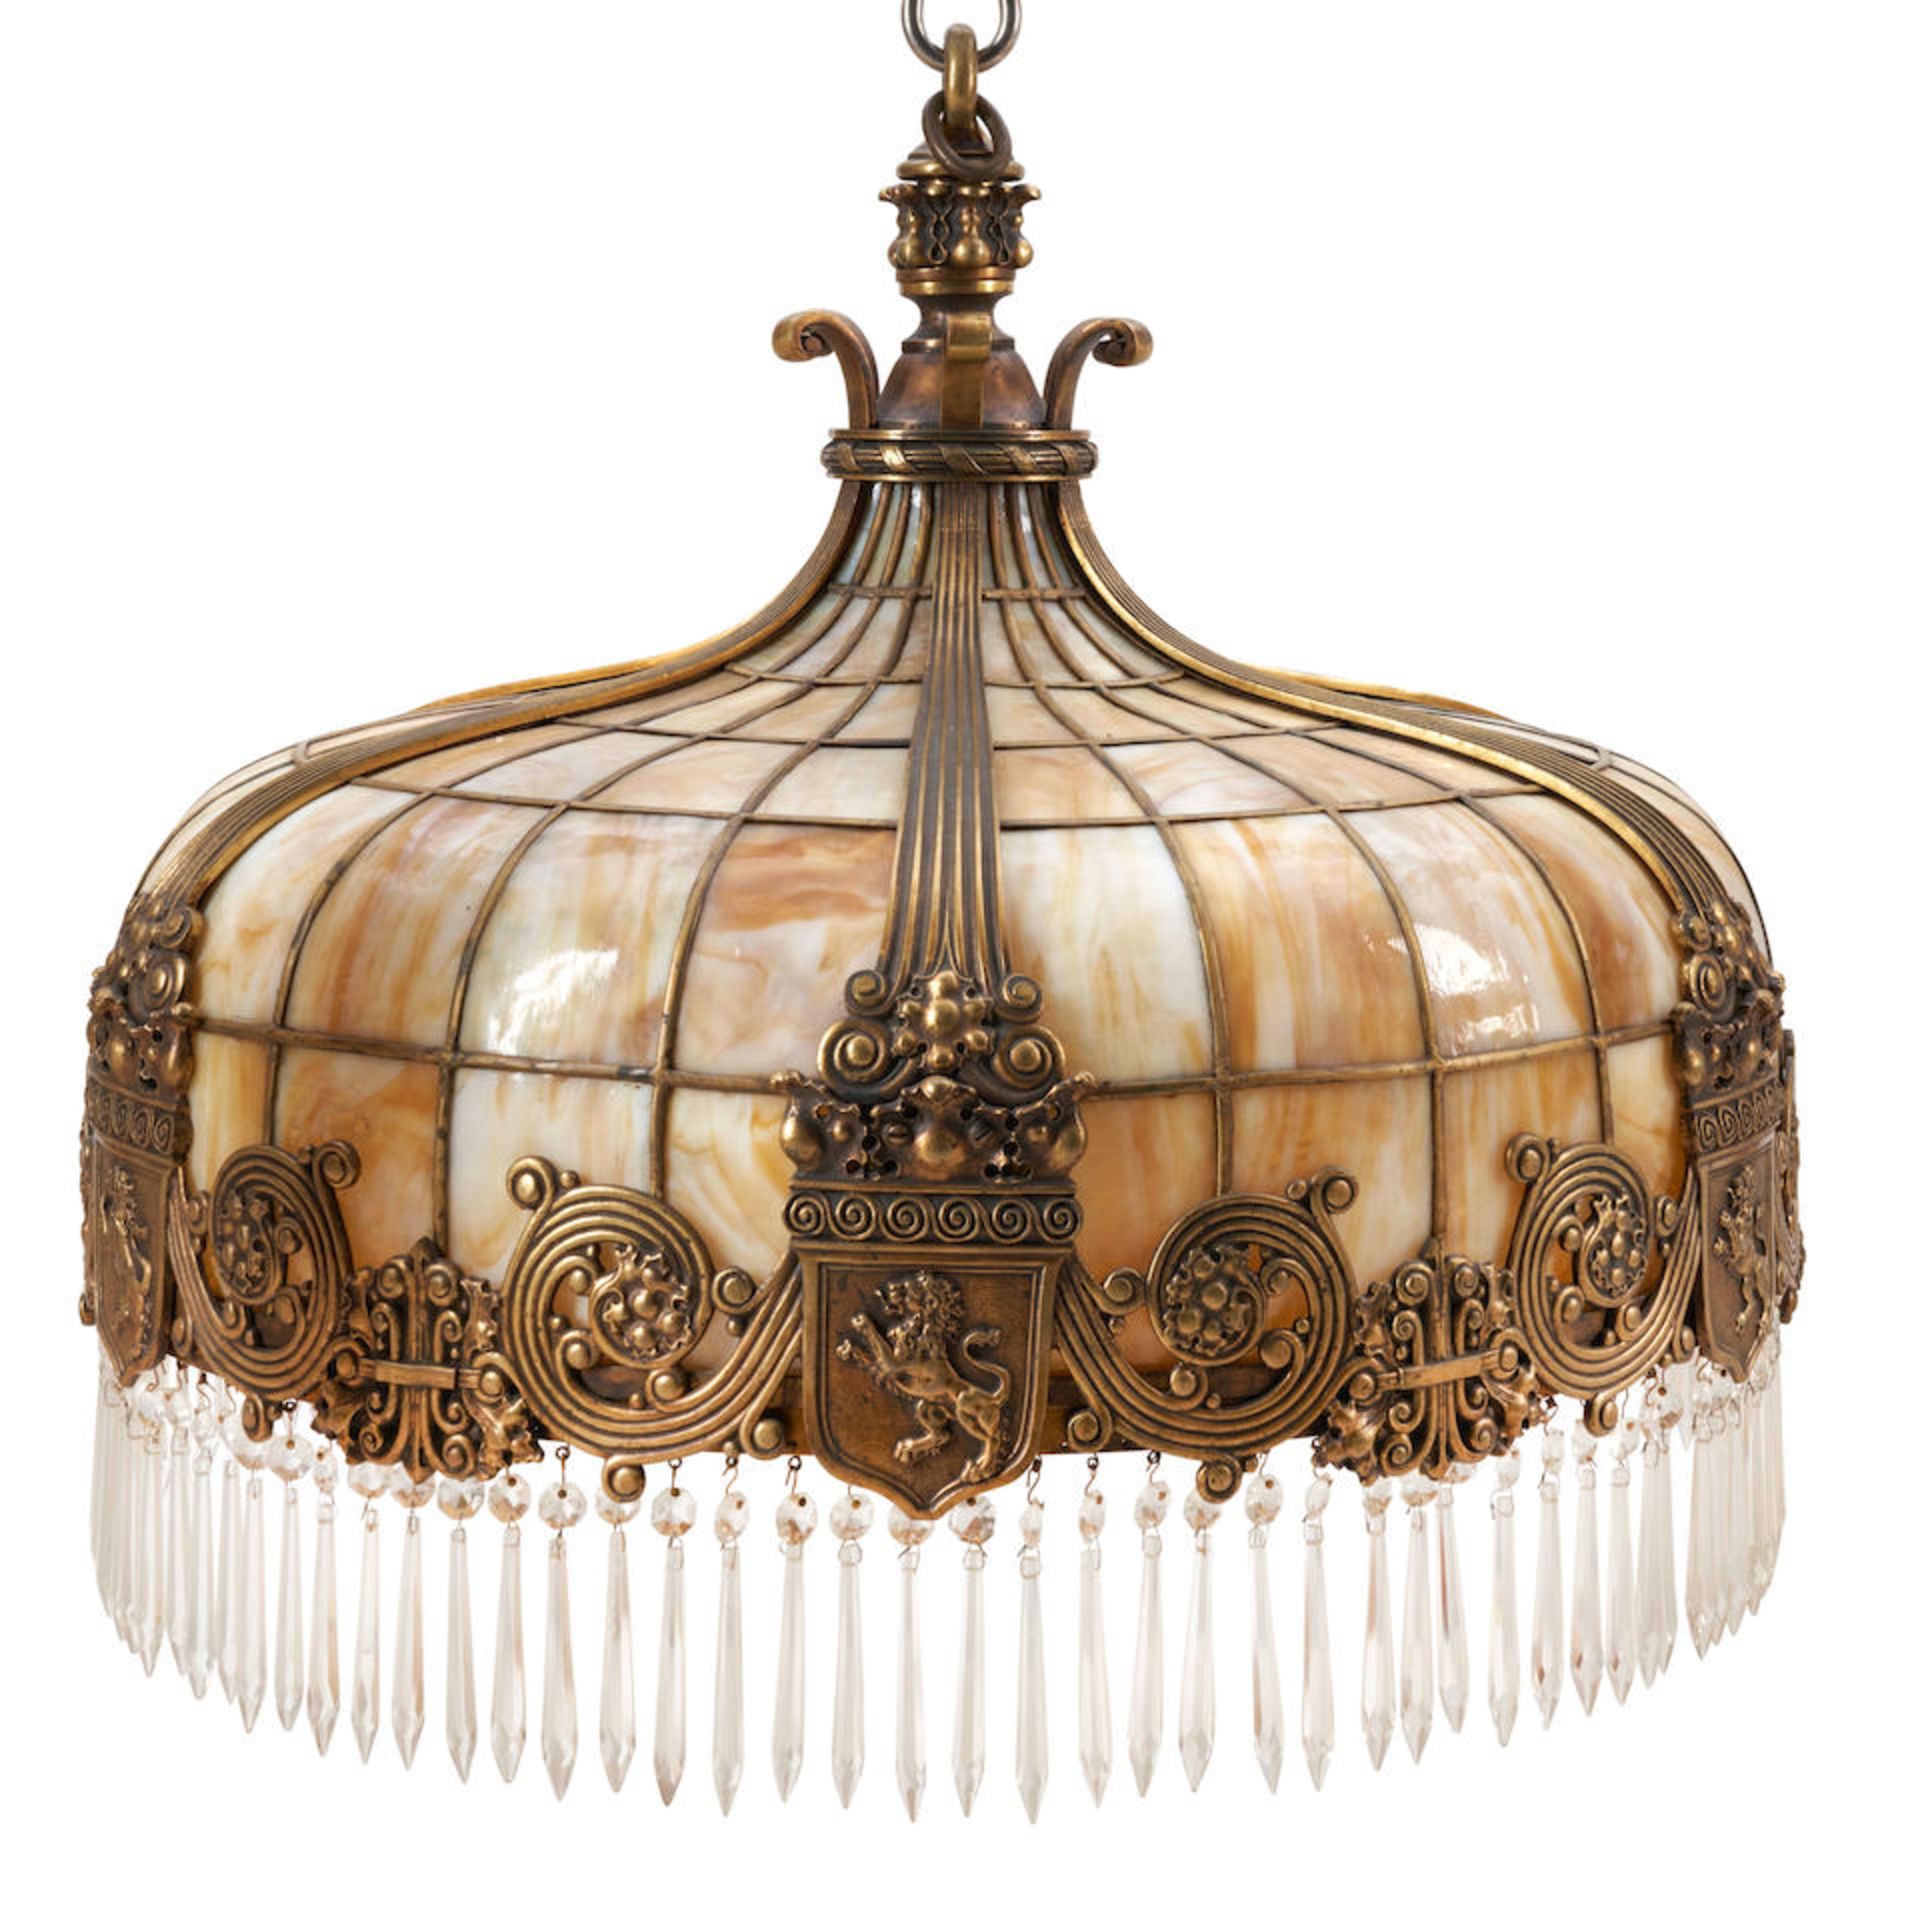 LEADED GLASS CHANDELIER ATTRIBUED TO DUFFNER AND KIMBERLY, New York, New York, c. 1910, gilt bro...